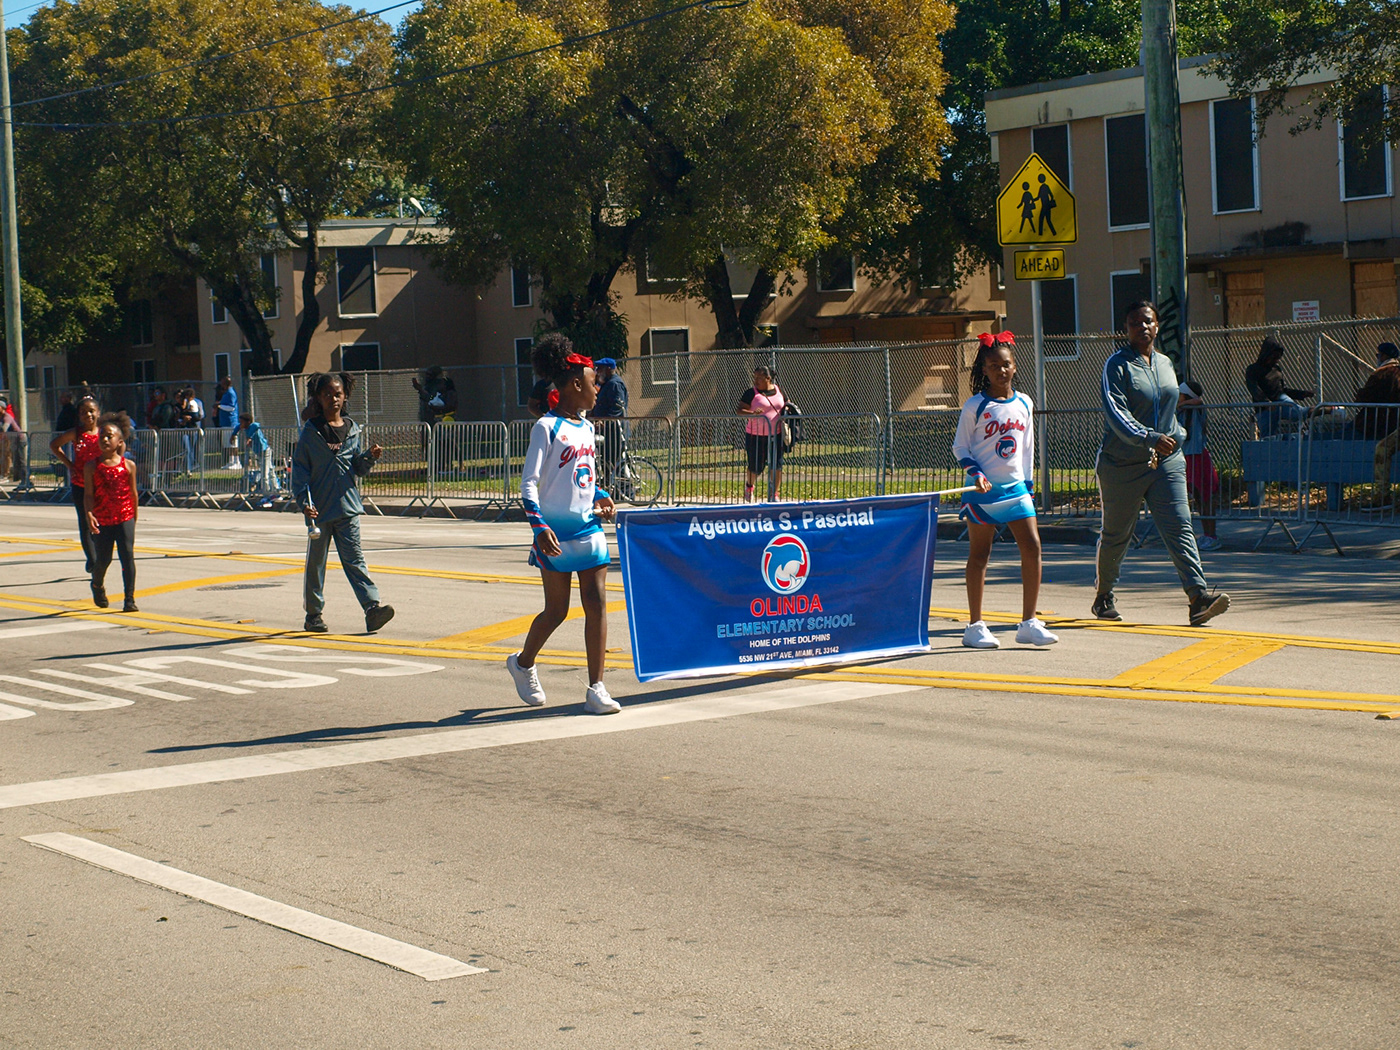 martin luther king jr parade miami jubilee scholars south florida community